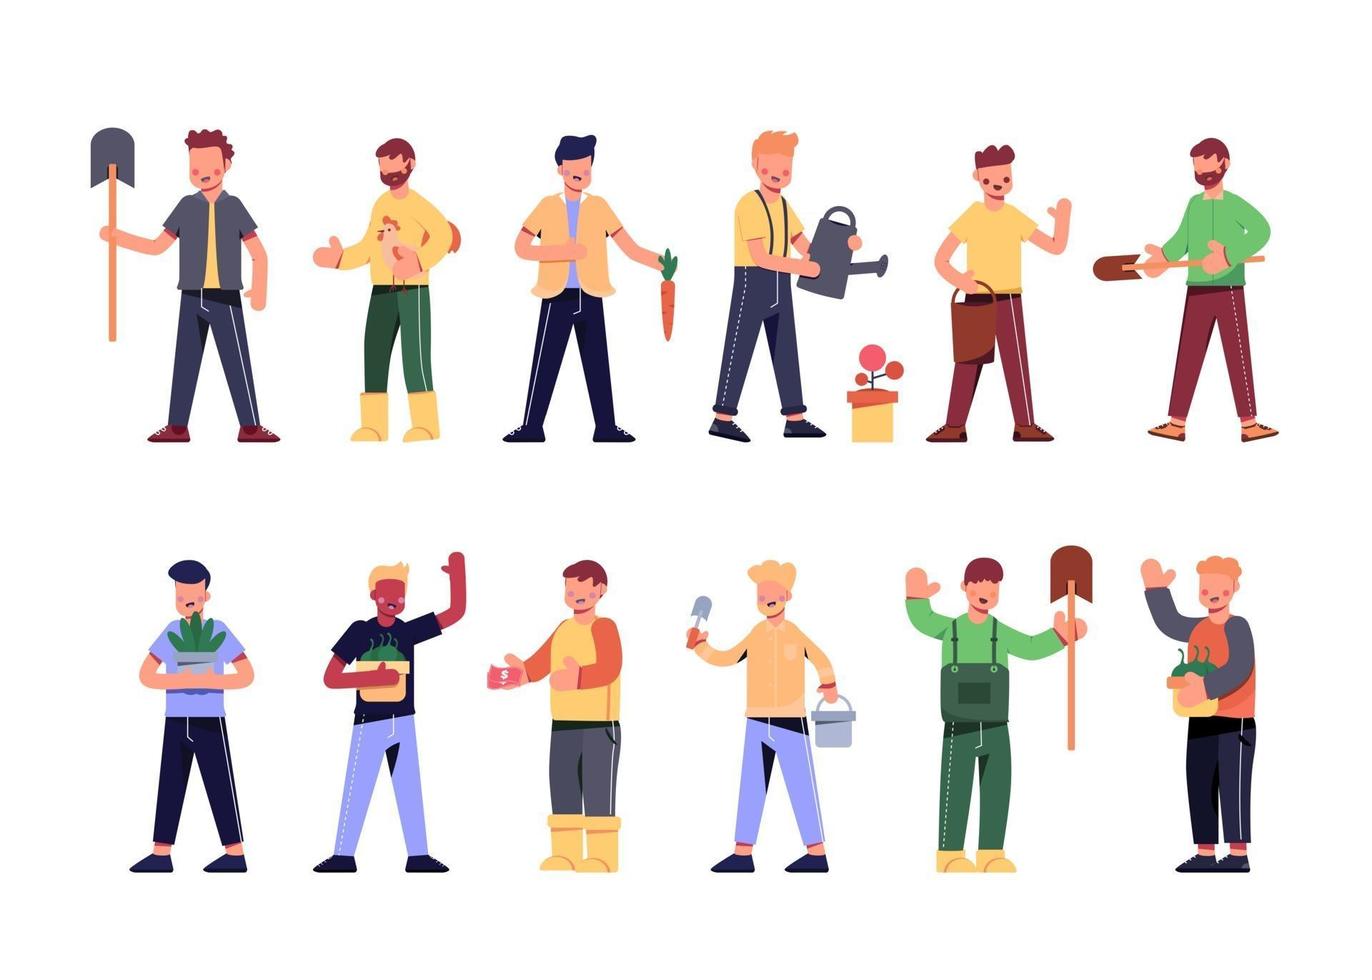 Bundle of many career character sets, 12 poses of various professions, lifestyles vector